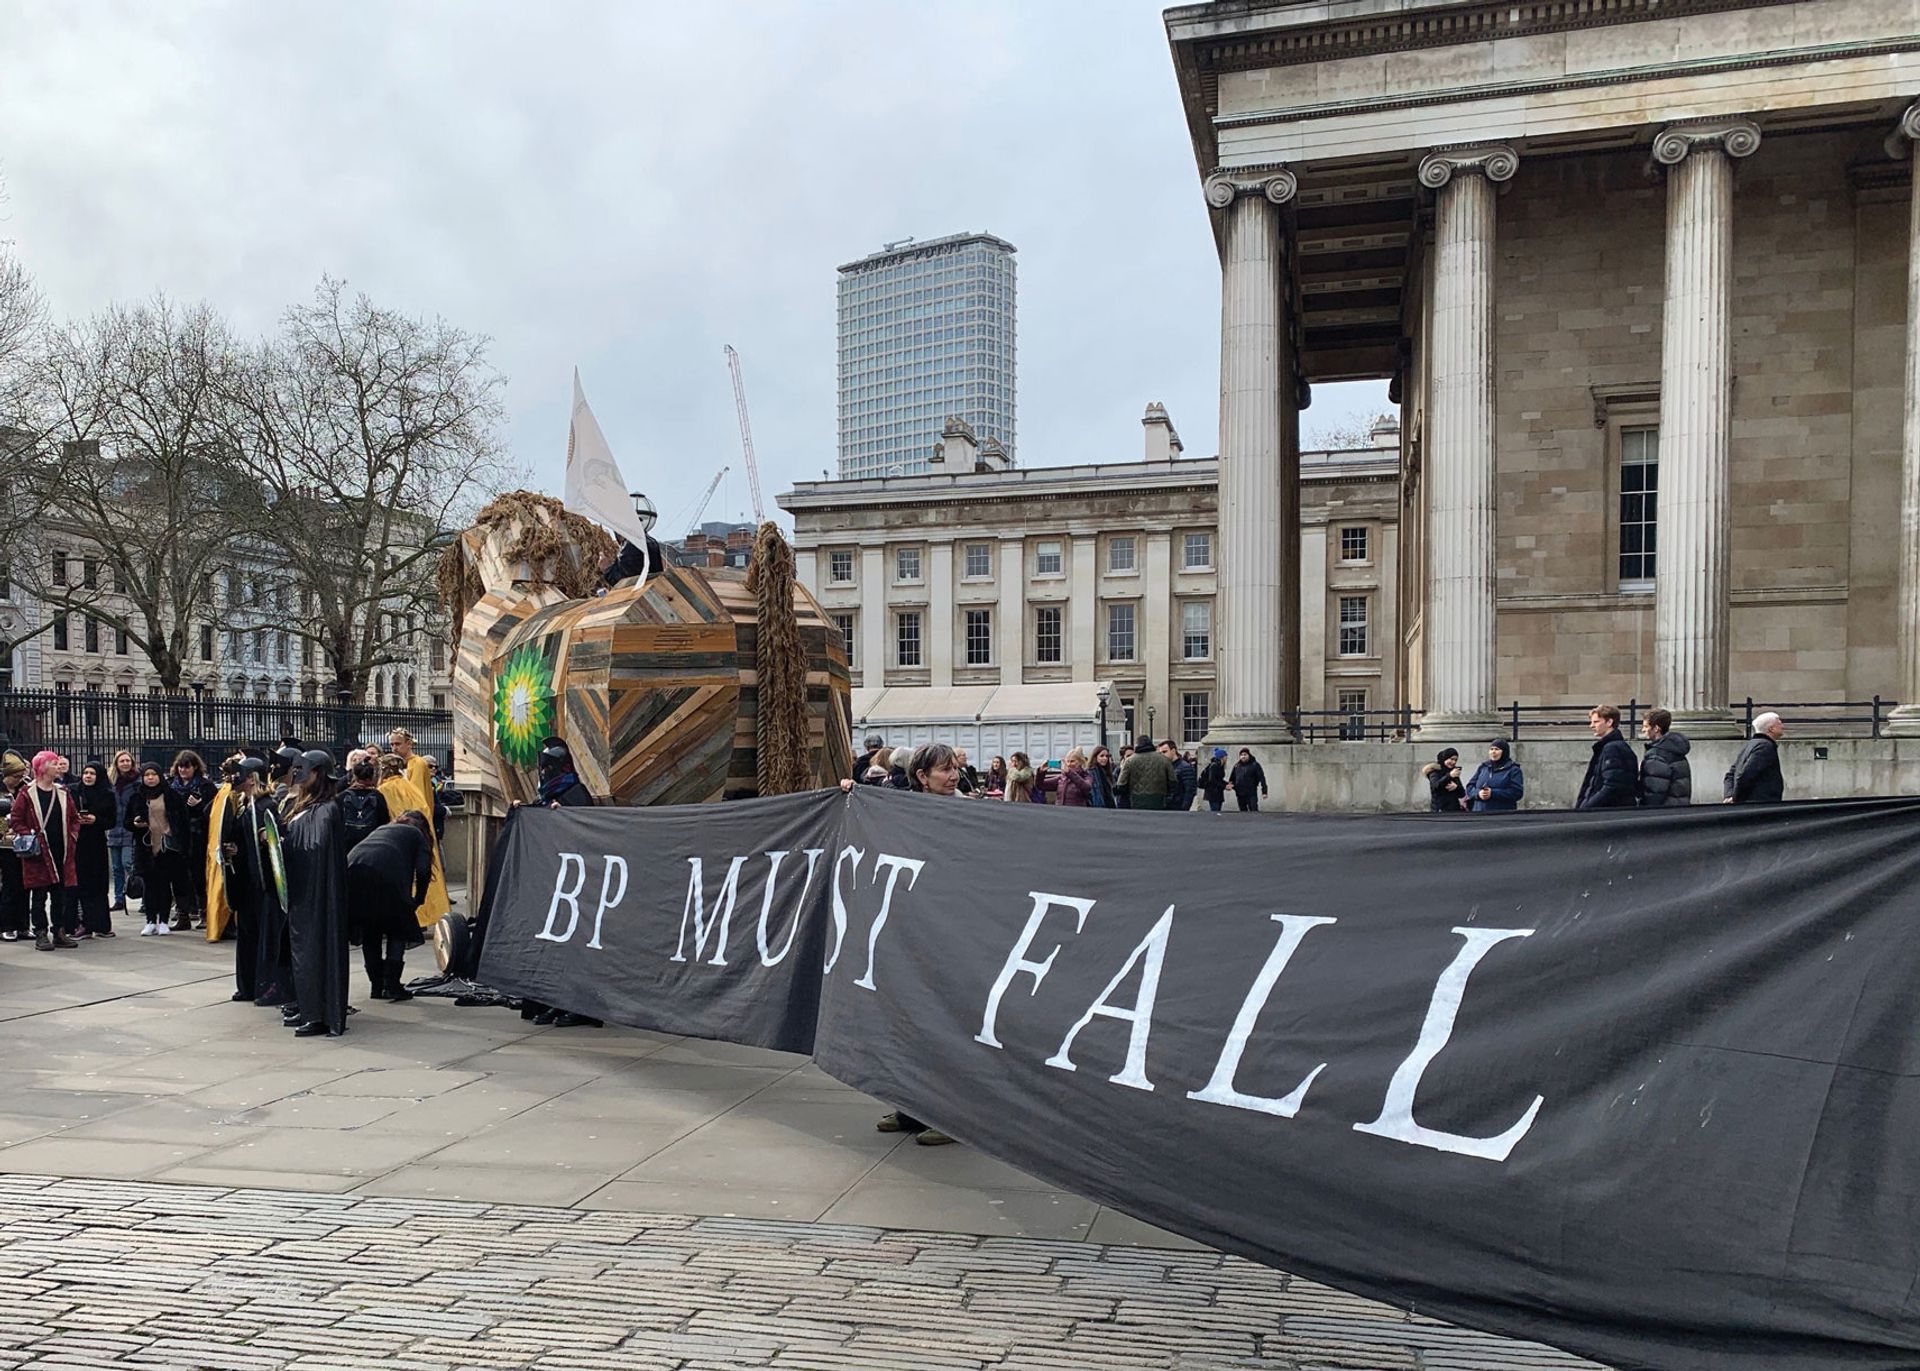 Climate activists smuggled a Trojan horse into the British Museum courtyard on Friday morning, kicking off a three-day protest against BP sponsorship Photo: Cristina Ruiz